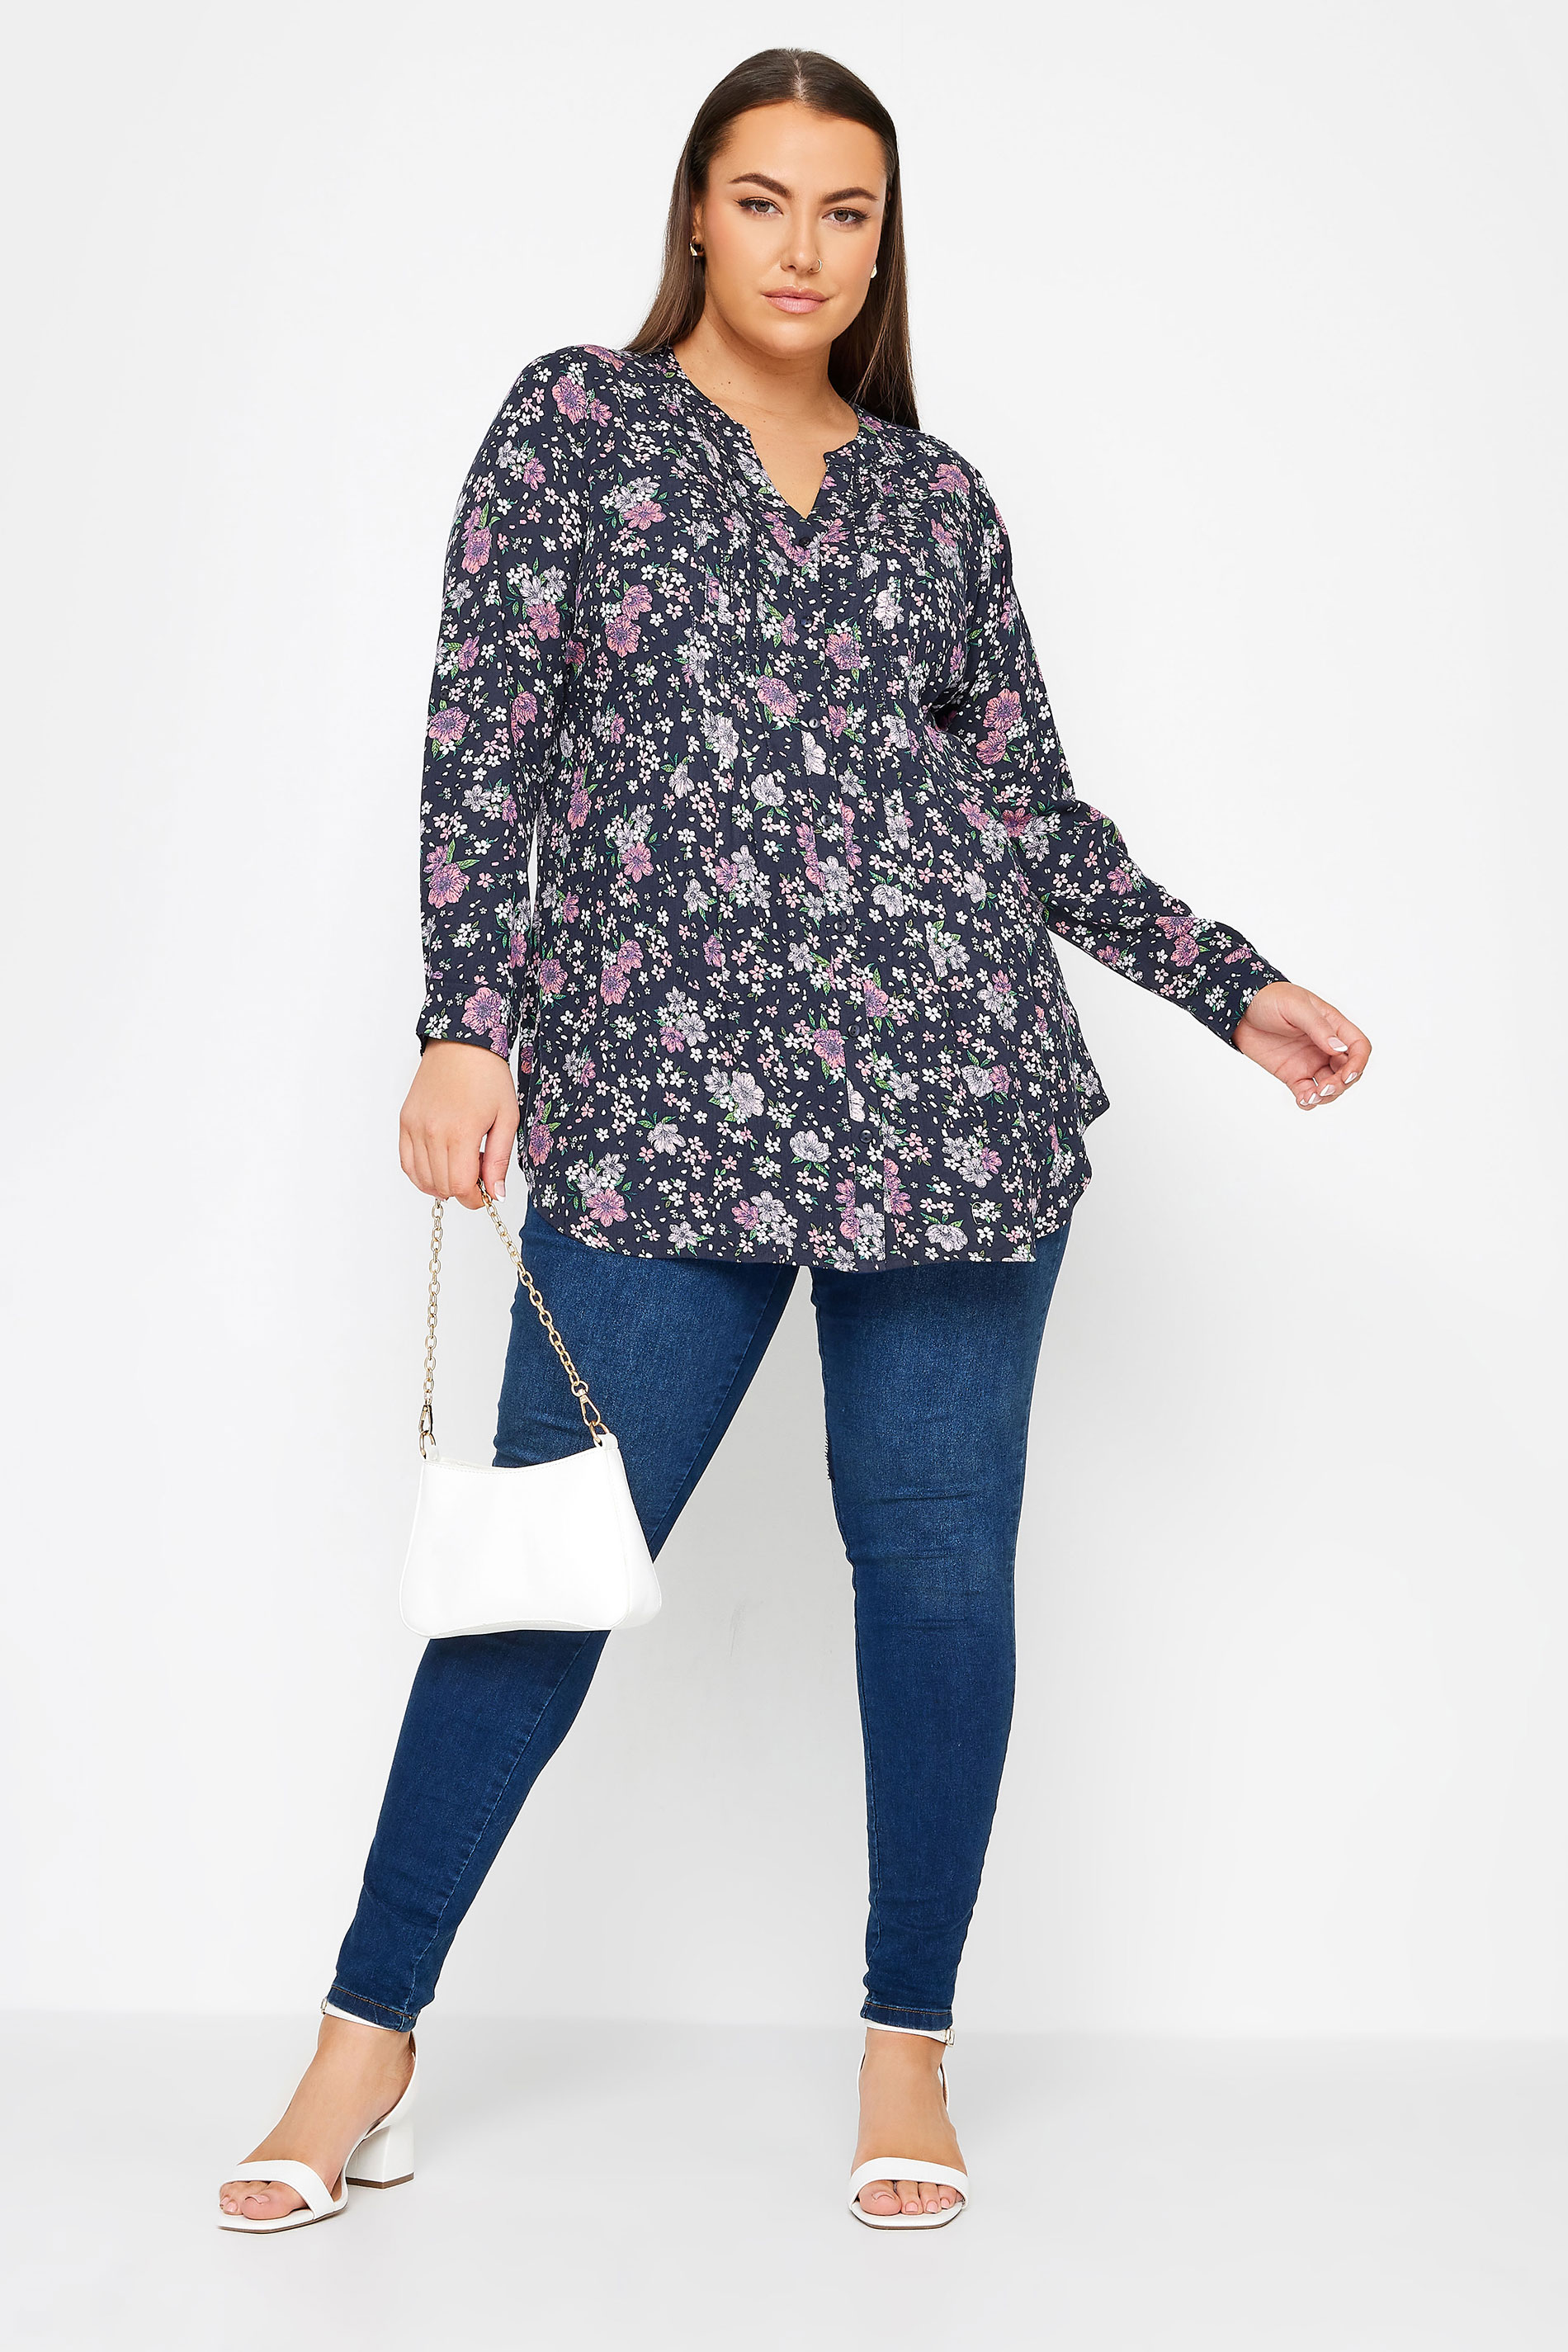 YOURS Plus Size Navy Blue Floral Print Pintuck Blouse | Yours Clothing 2